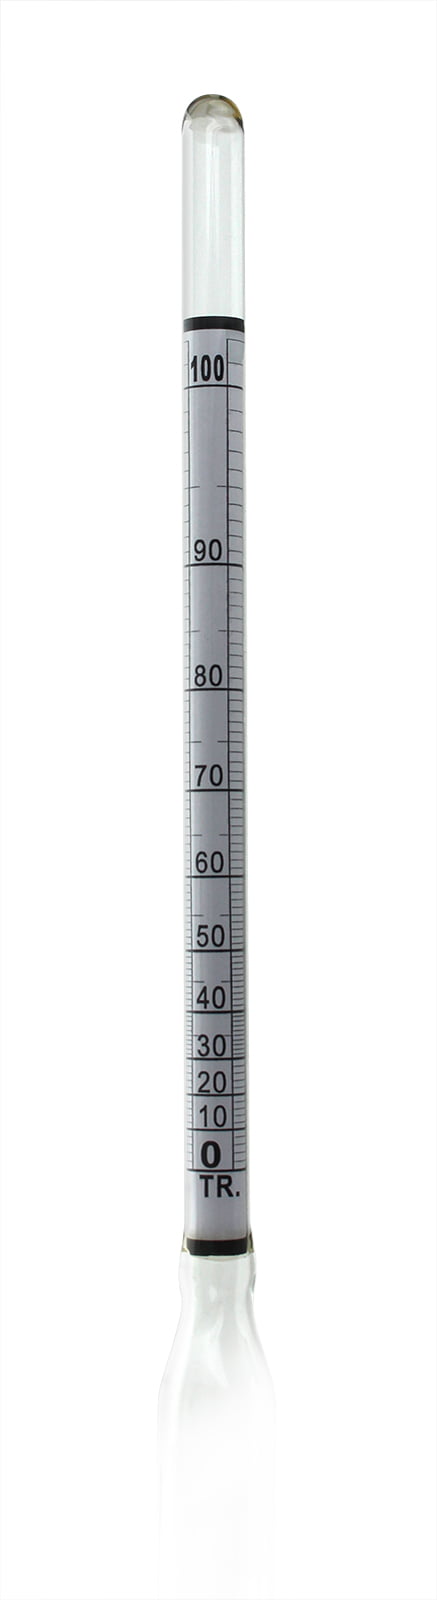 Hydrometer Alcohol Meter Test Kit Hydrometer Alcohol 0-200 Proof Digital  Hydrometer Alcohol with 1 Glass Cylinder, 1 Brush and 2 Airlock for  Proofing Distilled, Alcohol Content Tester: : Industrial &  Scientific